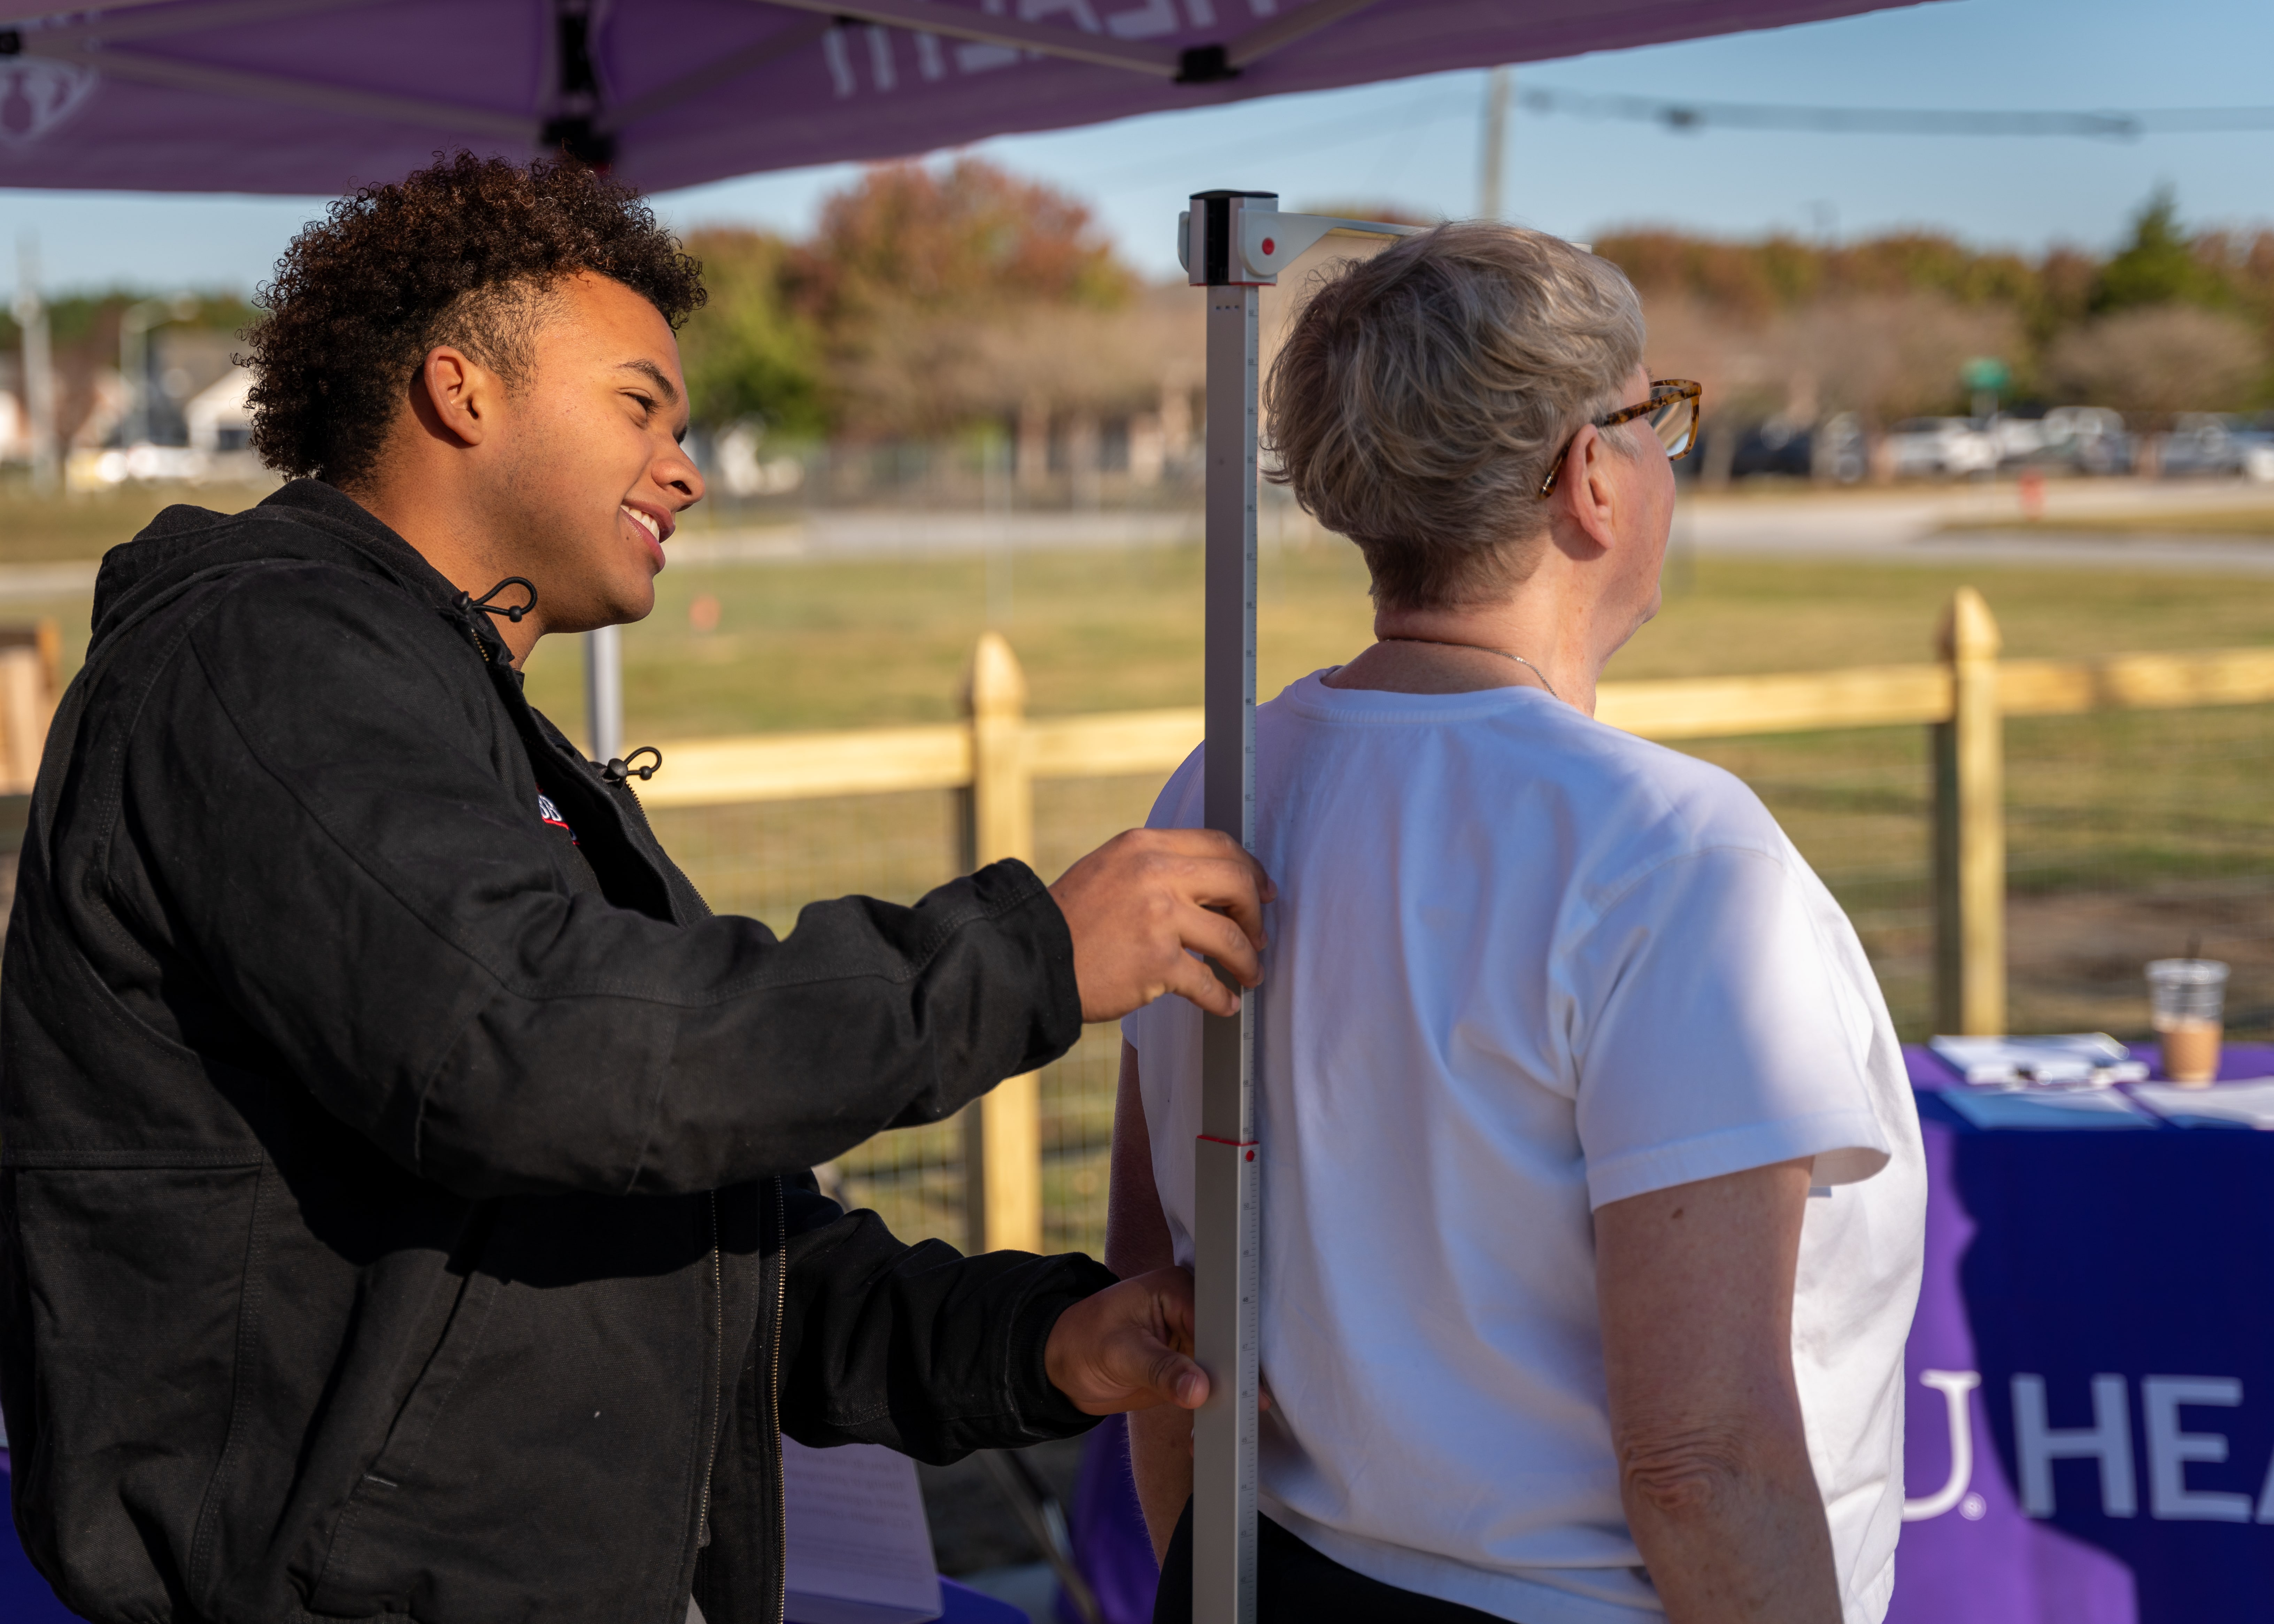 A community member takes part in a wellness screening at a community health event.